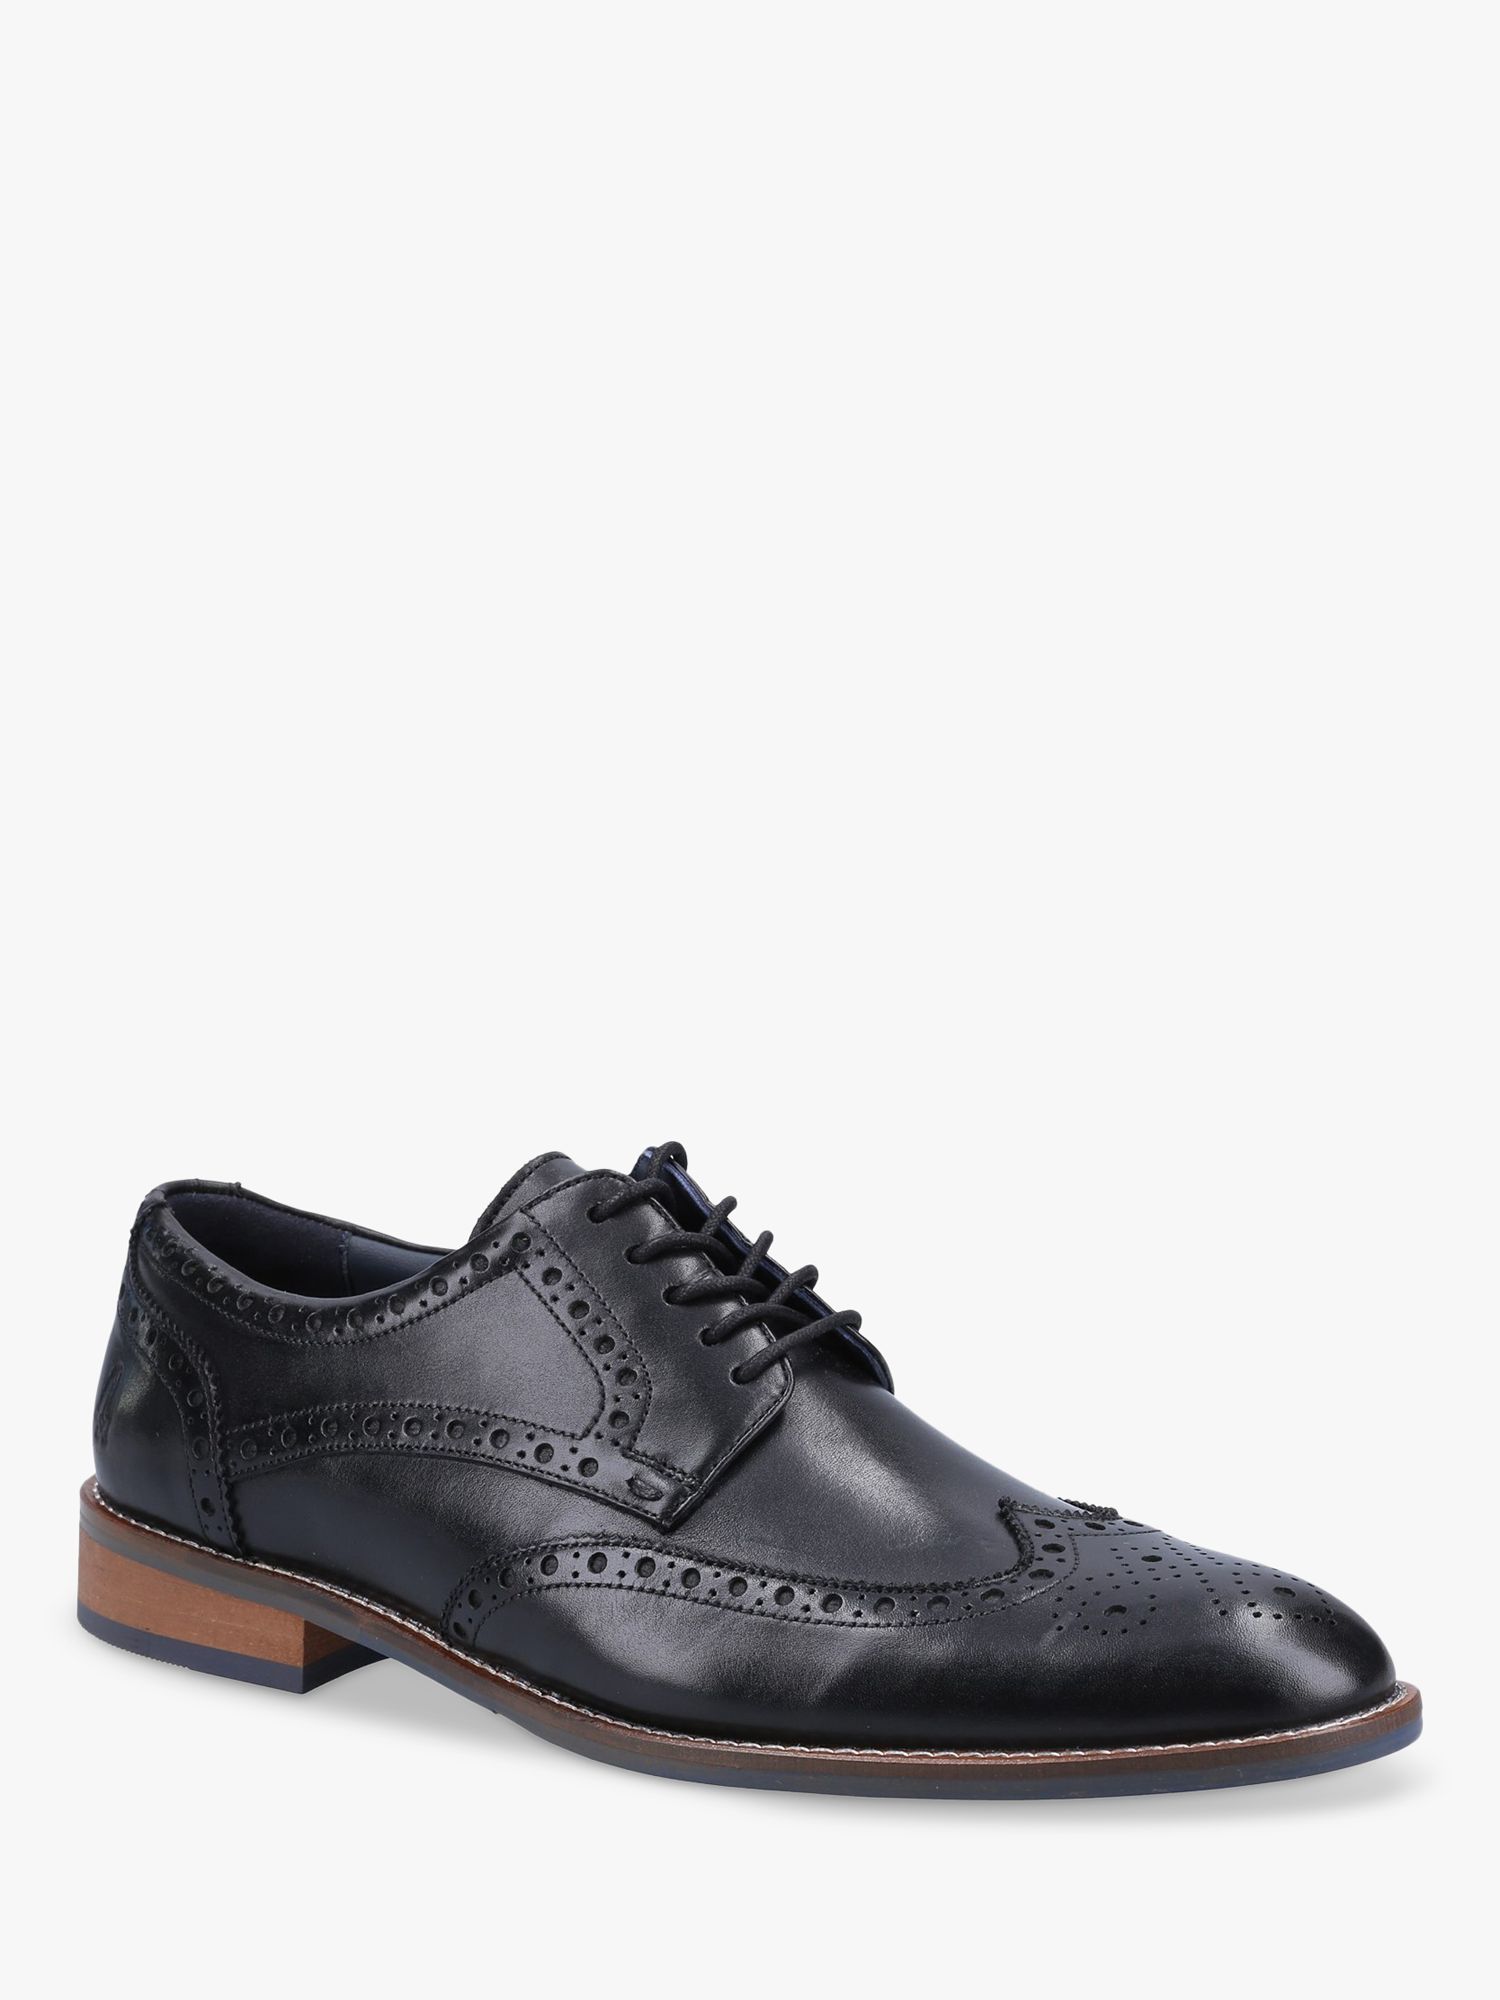 Hush Puppies Dustin Leather Brogues, Black, 6